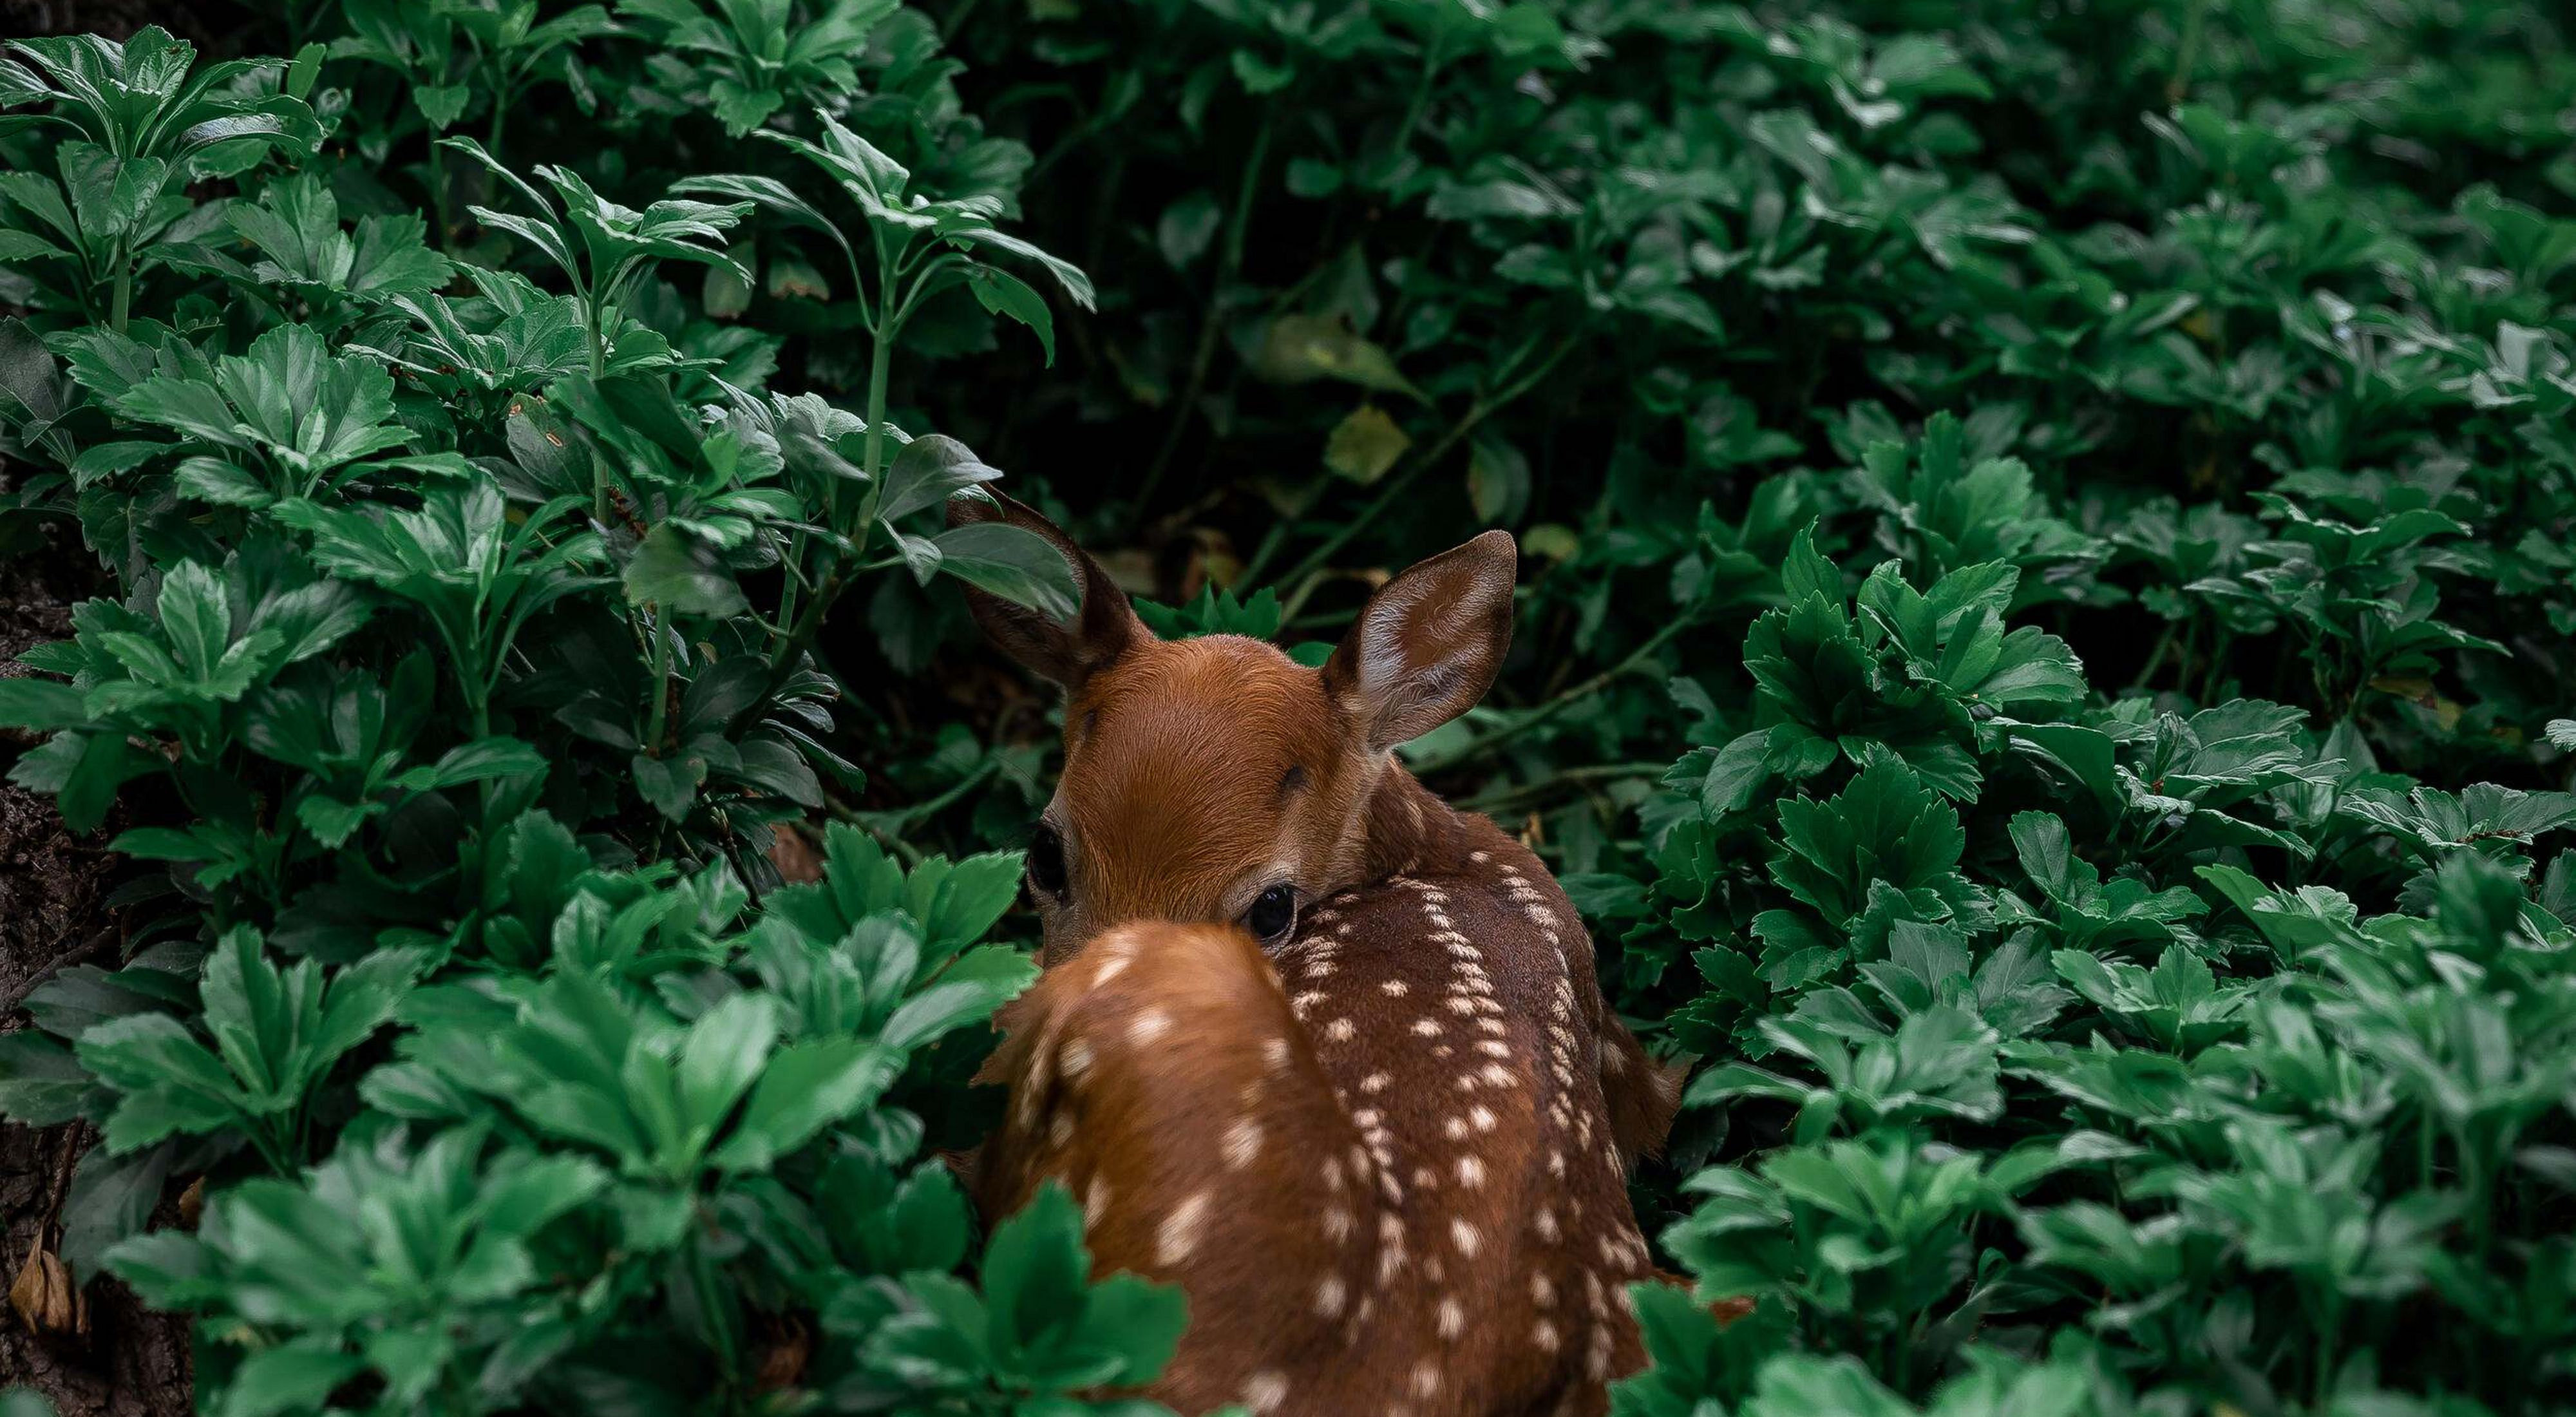 A white-tailed deer fawn curled up in greenery.